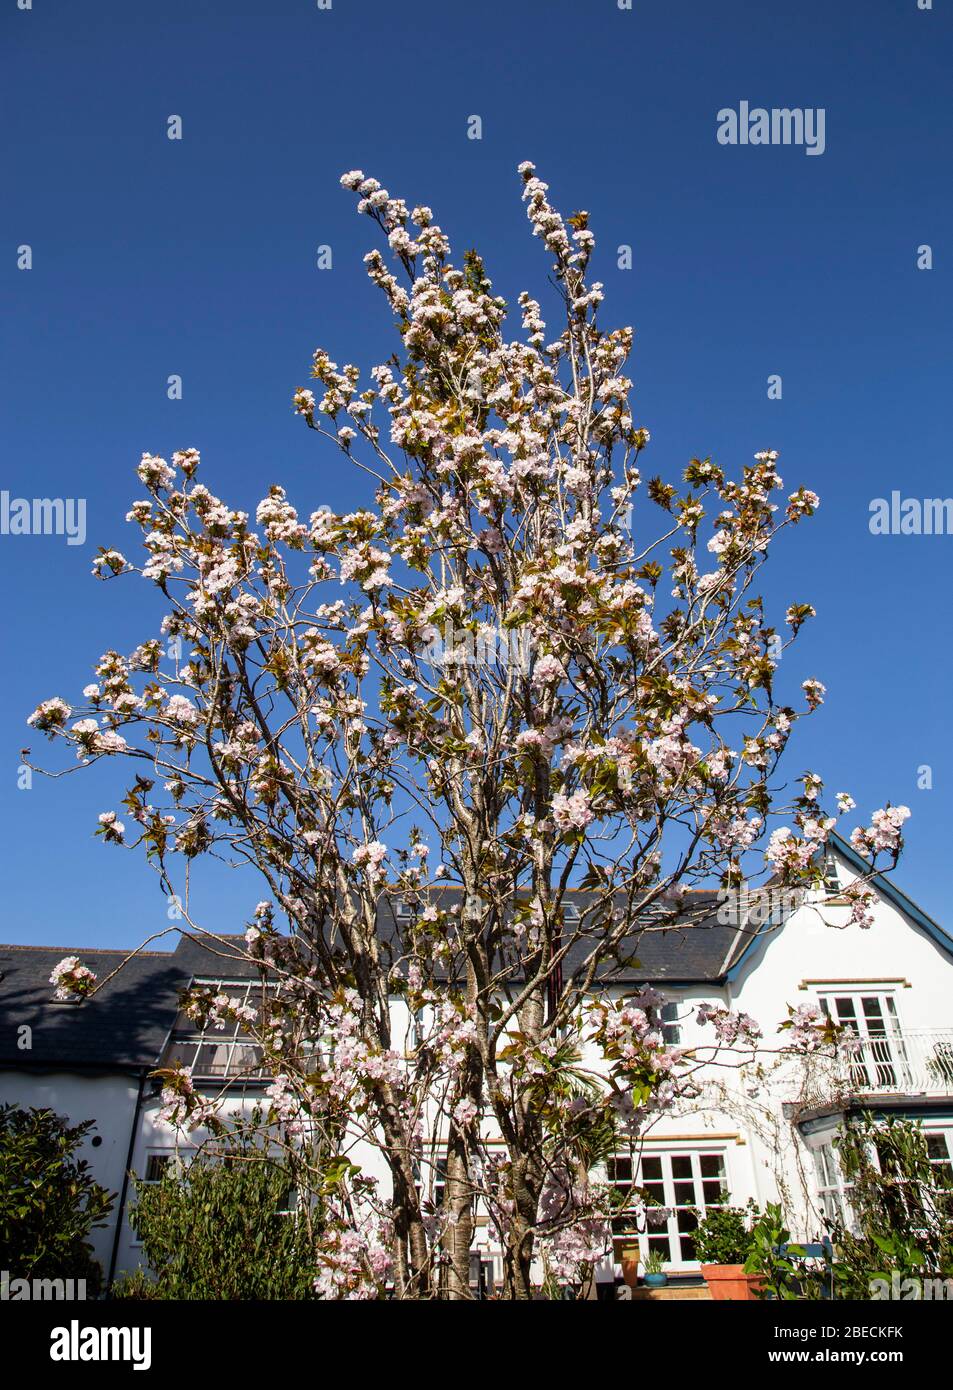 An ornamental cherry tree with pink blossom grows beside a white walled house in Devon, with blue sky behind. Stock Photo